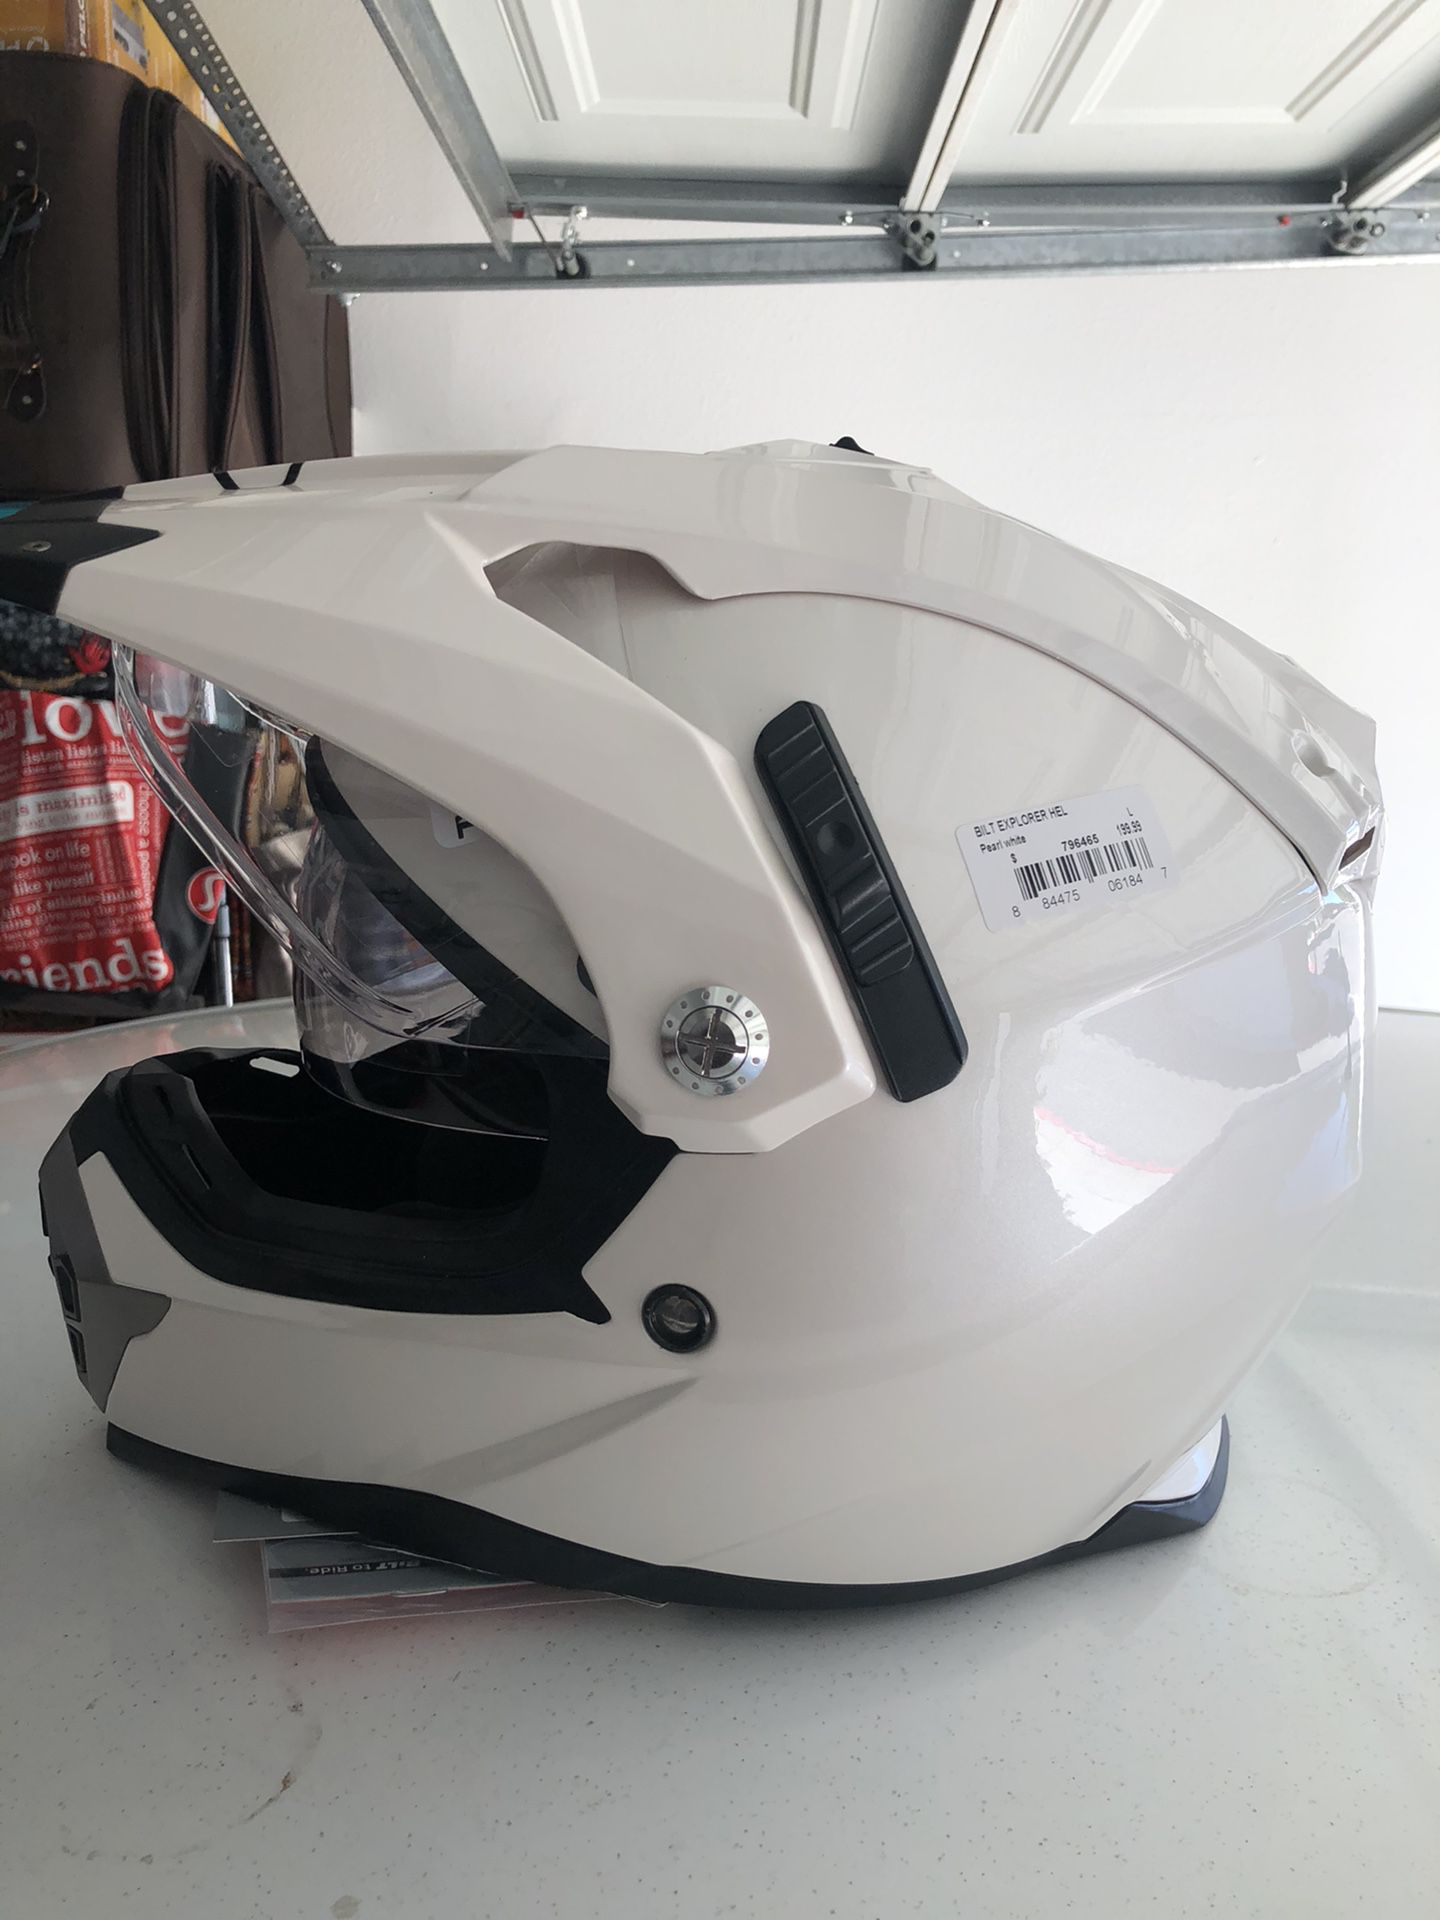 Motorcycle adventure helmet, never used with tags